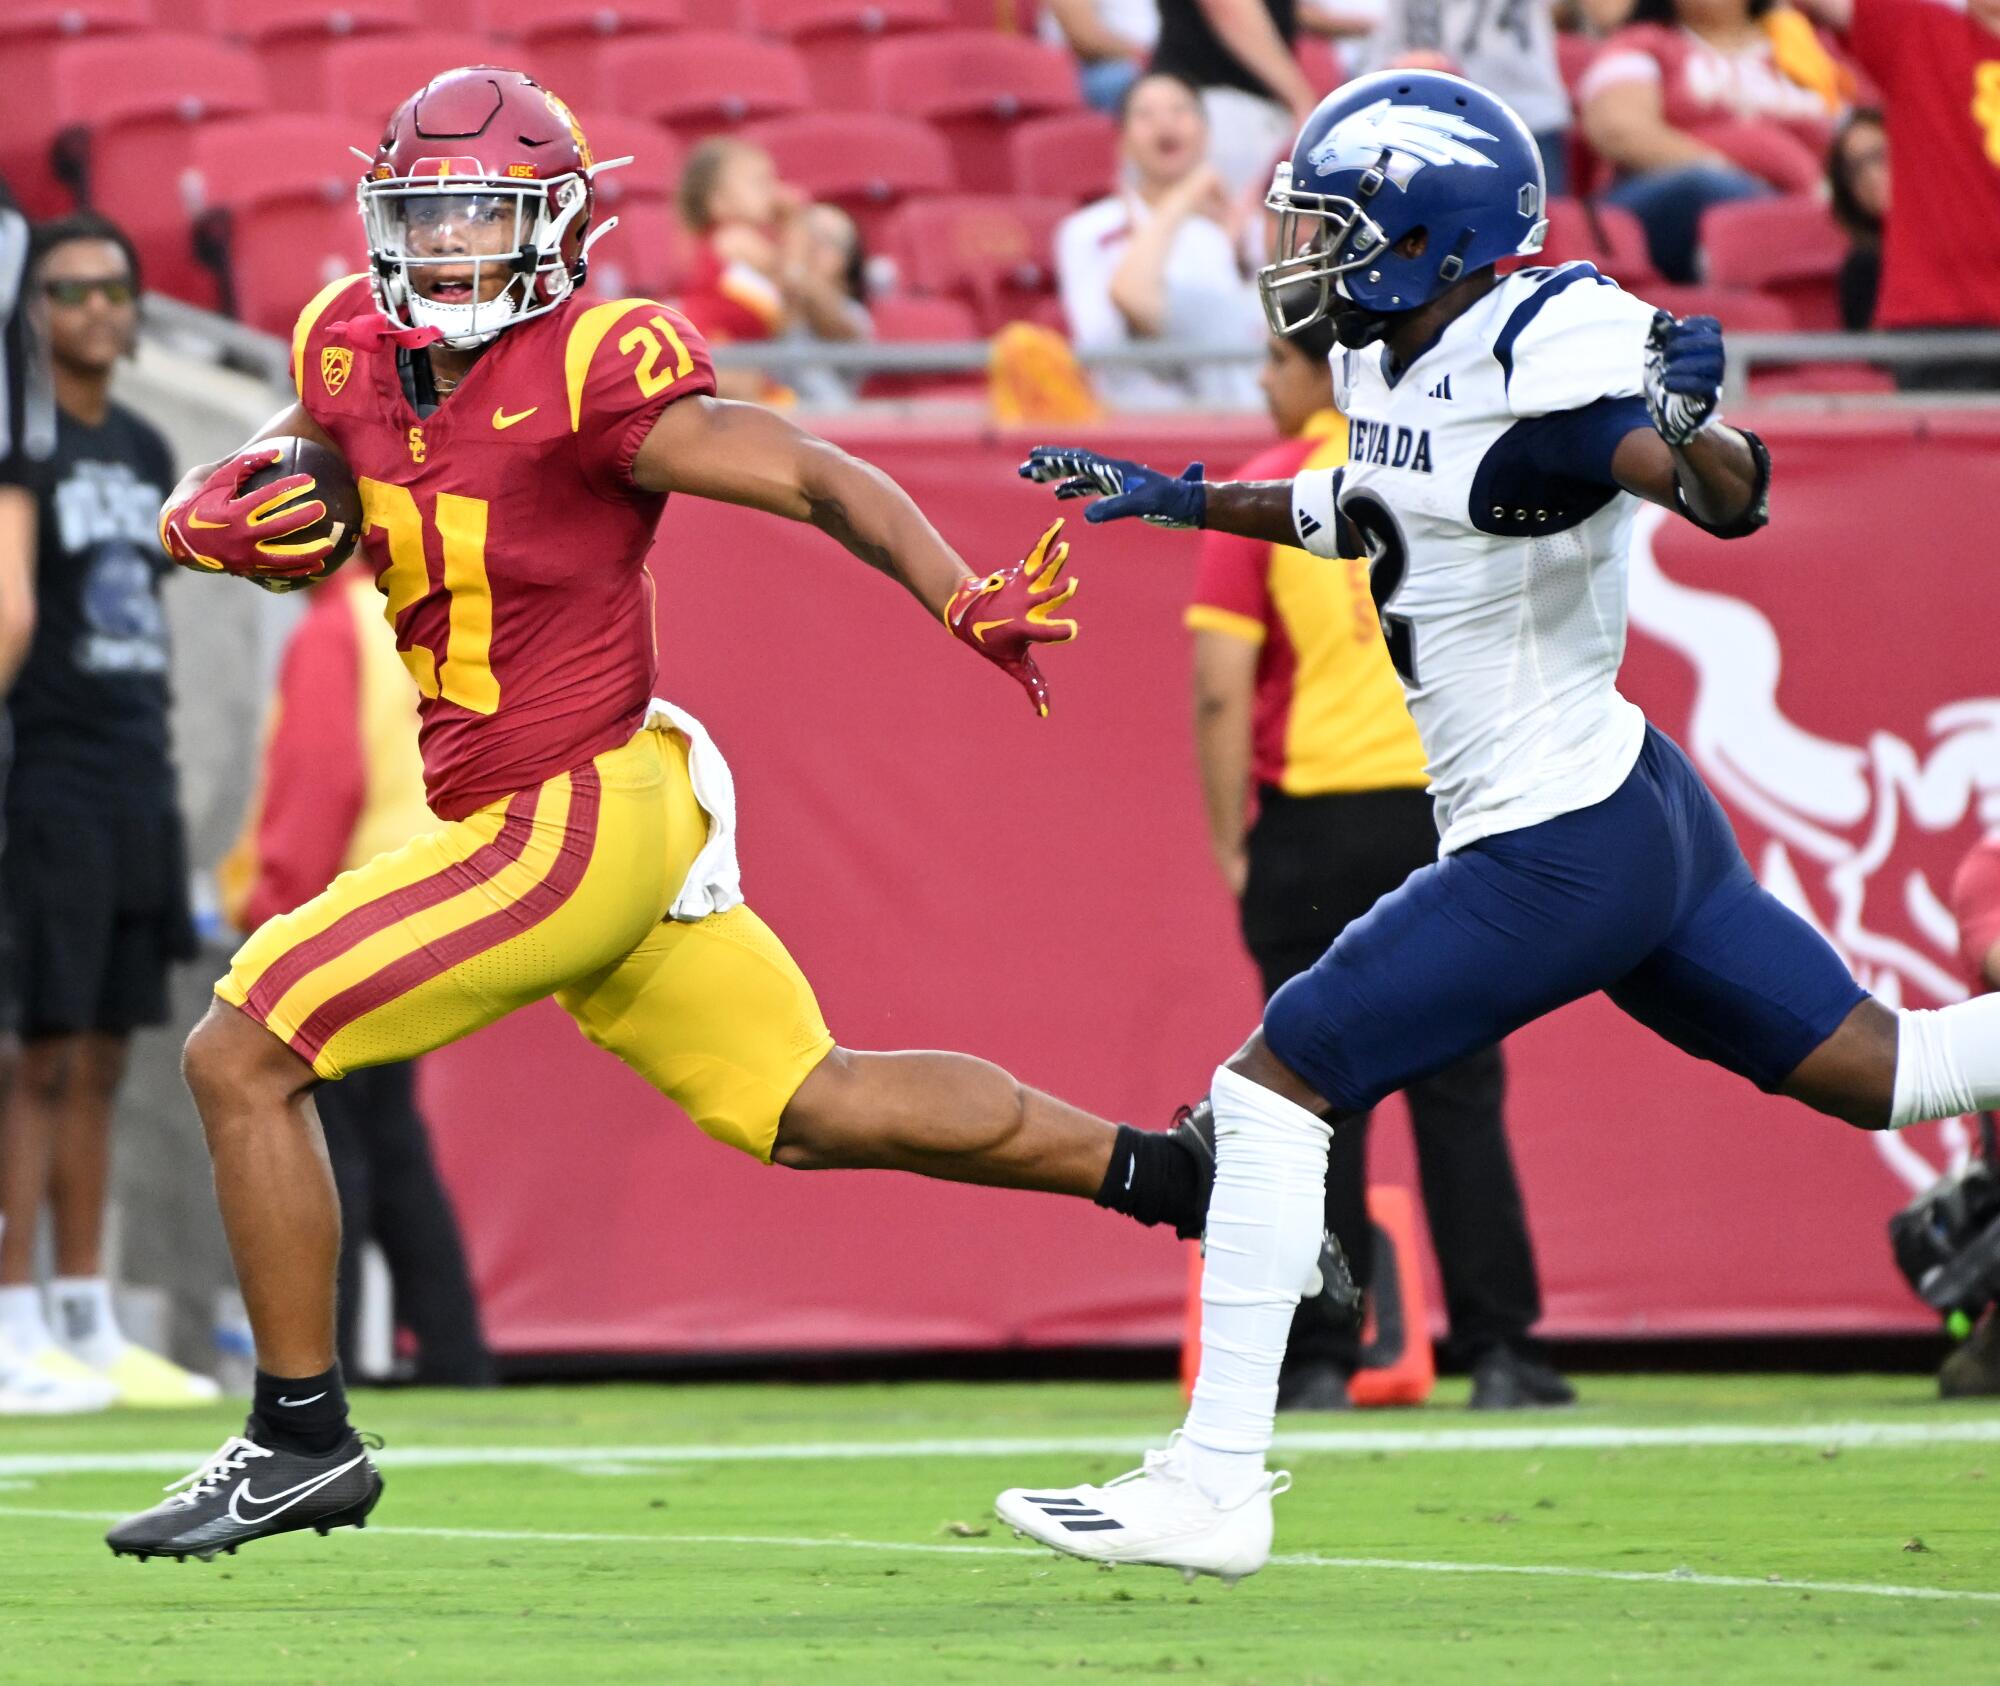 A USC player runs toward the end zone as a Nevada player chases